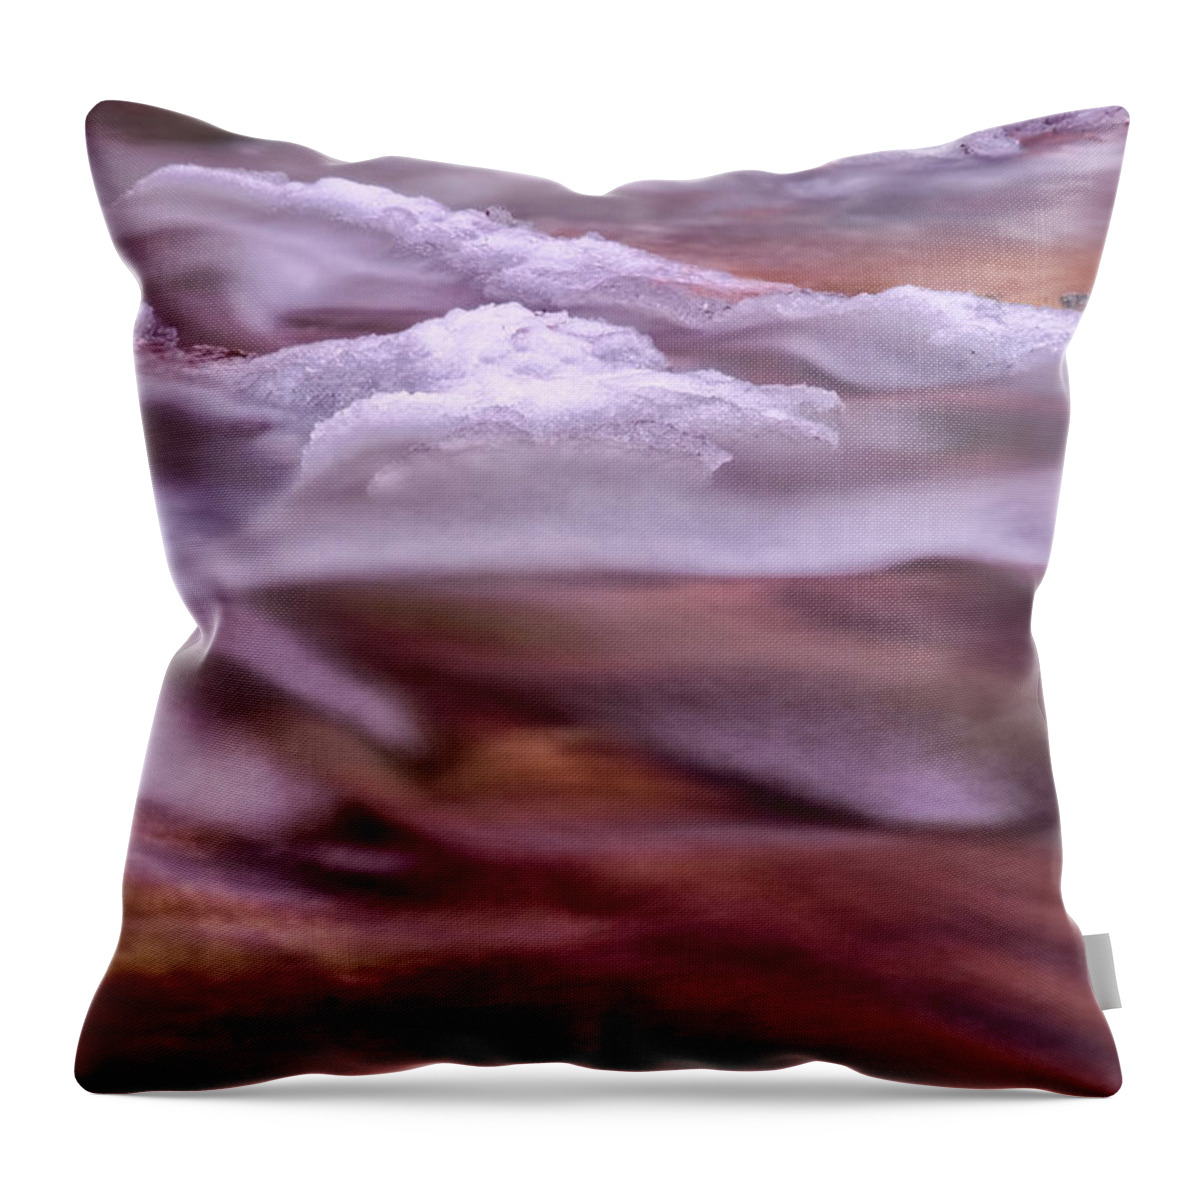 Stickney Brook Throw Pillow featuring the photograph Stickney Brook Abstract II by Tom Singleton